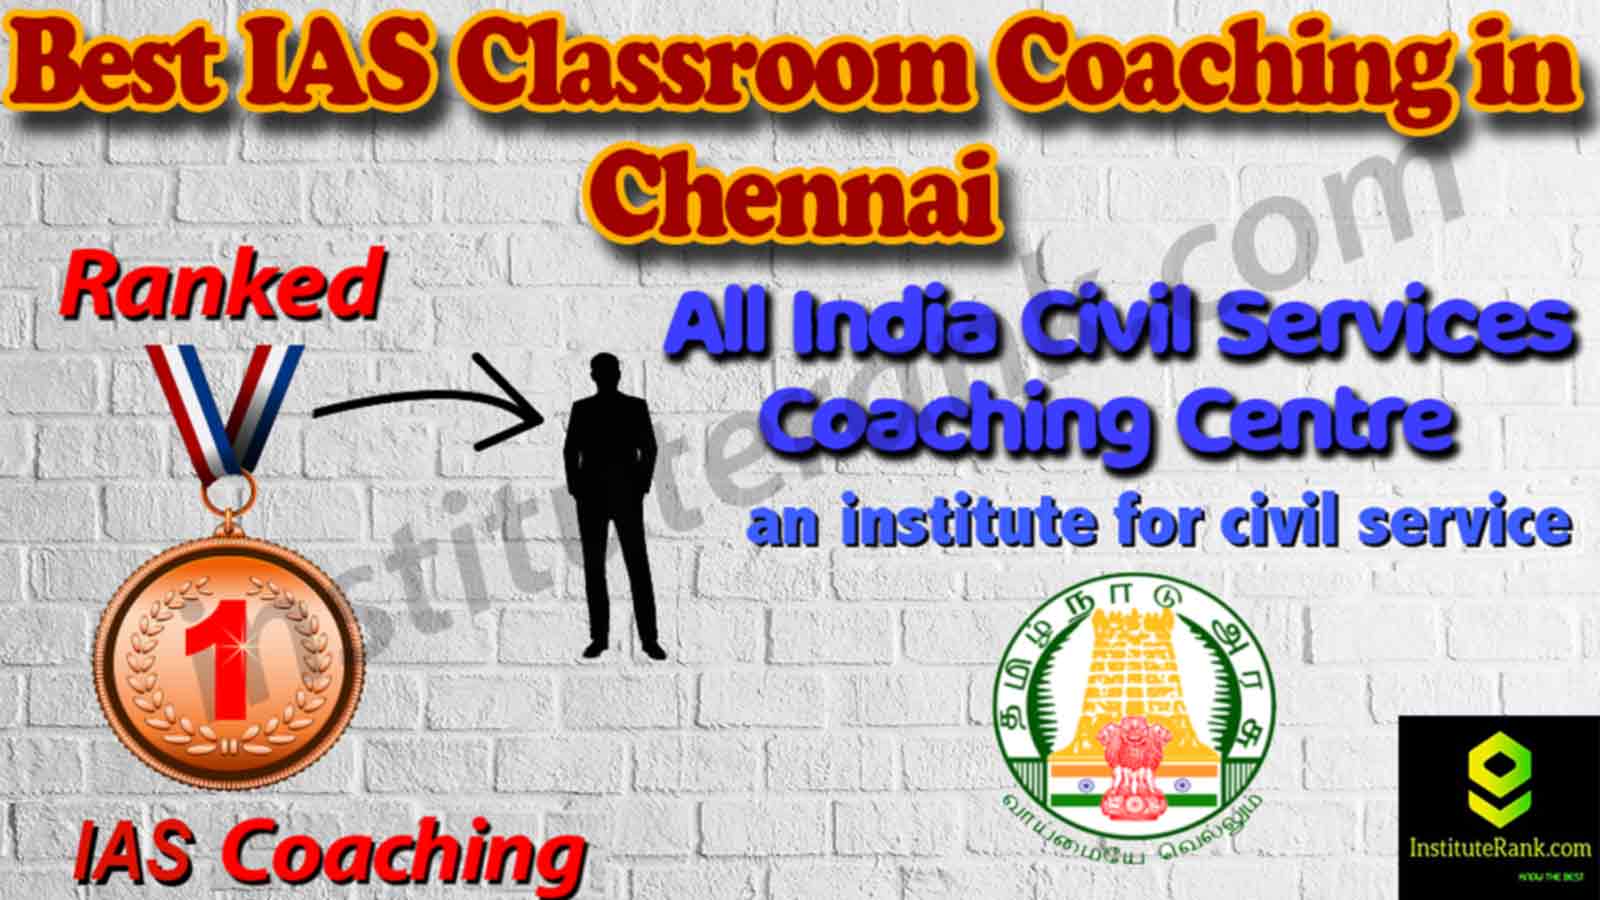 Top IAS Coaching and fees in Chennai